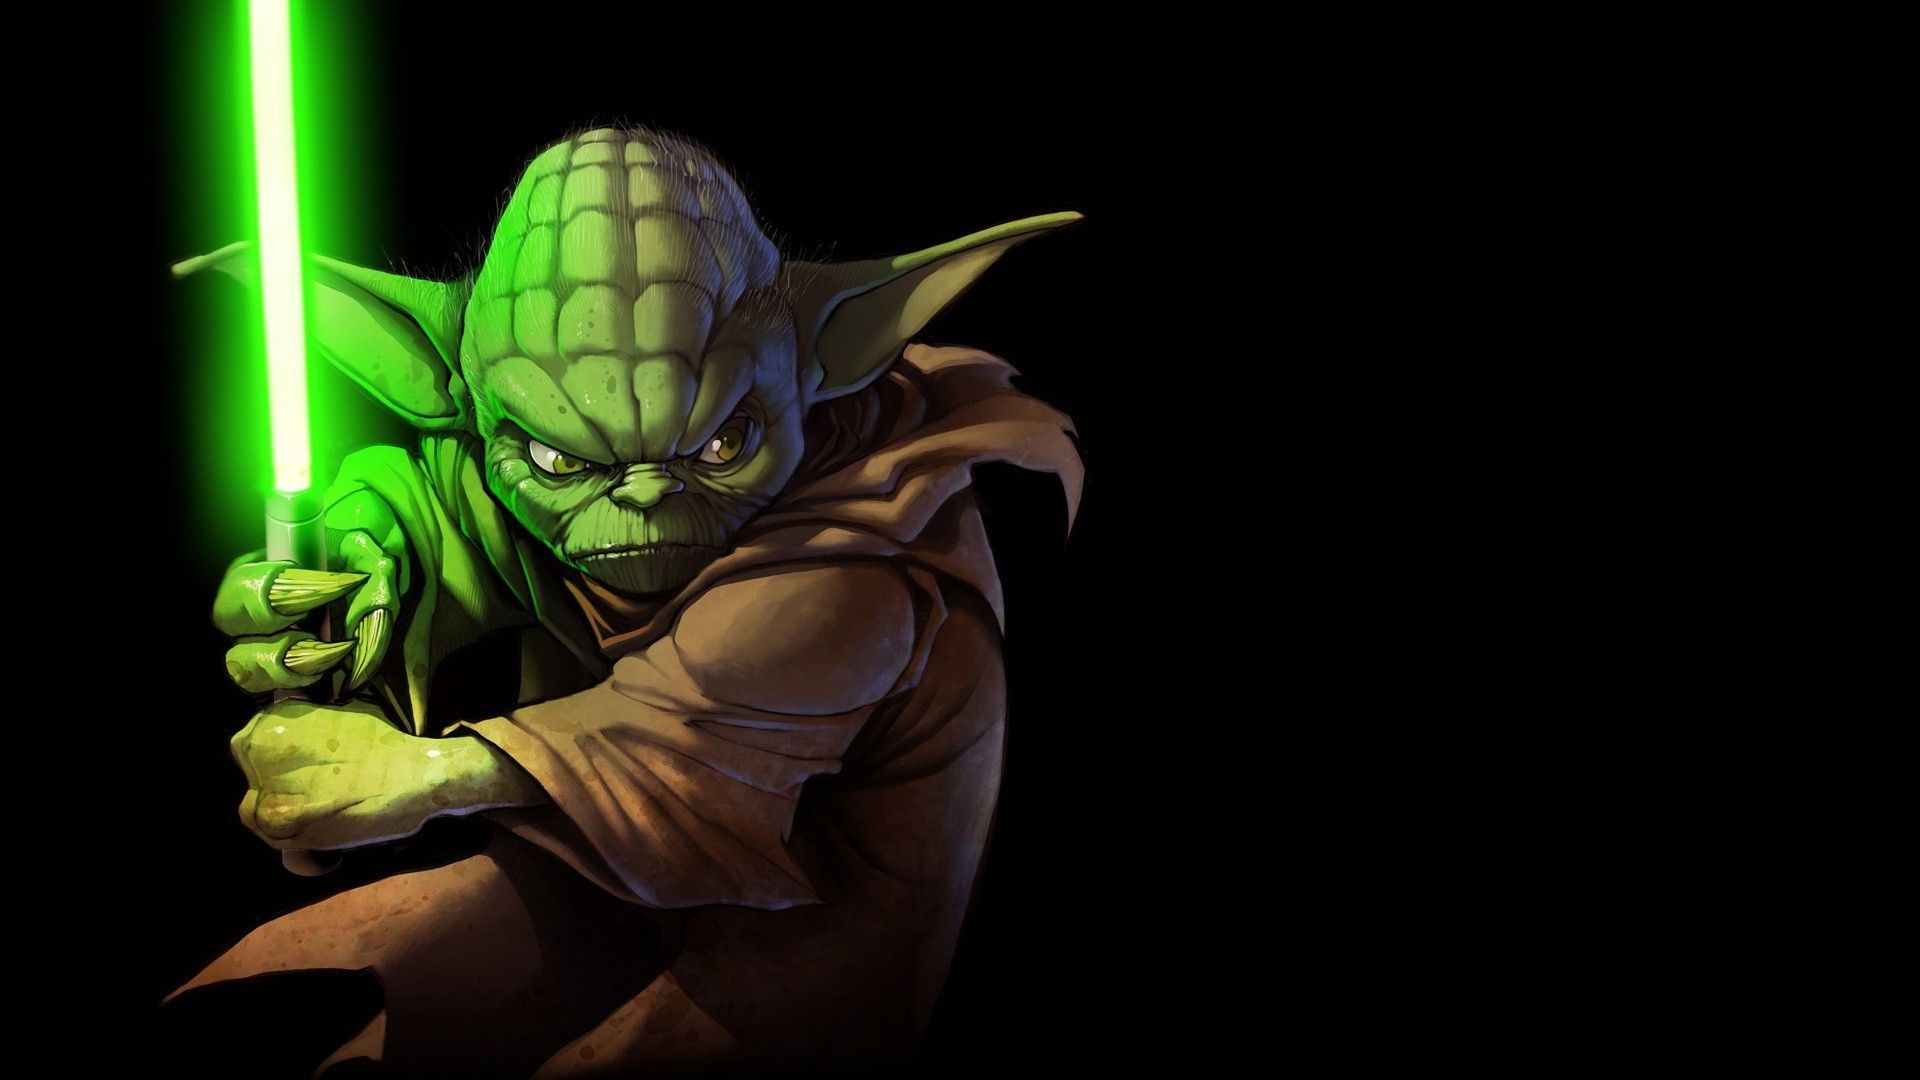 Pictures > yoda wallpaper